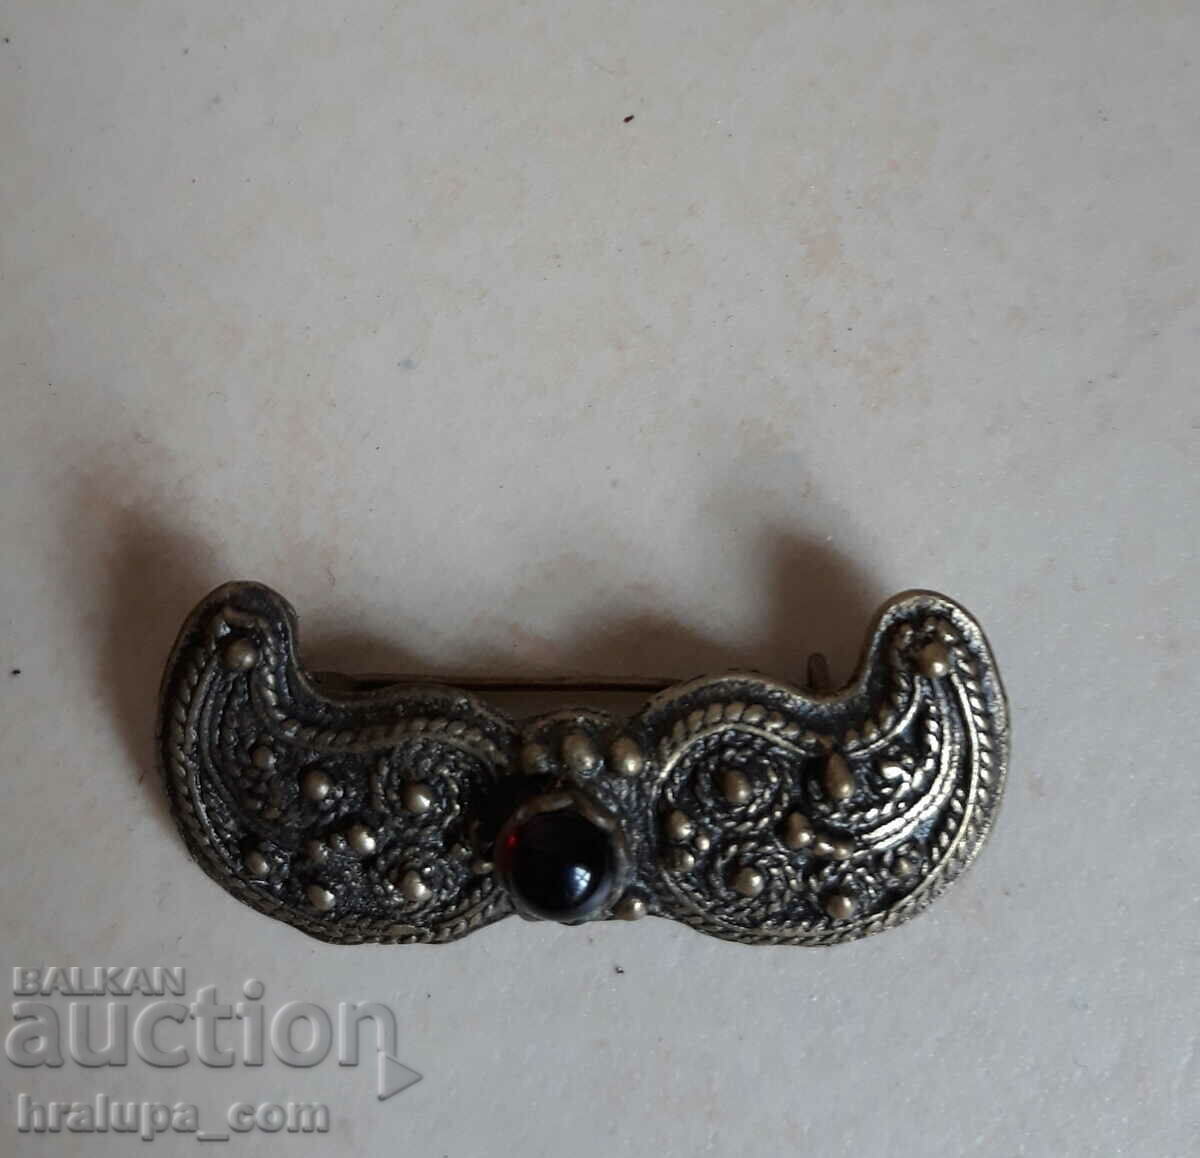 An old brooch